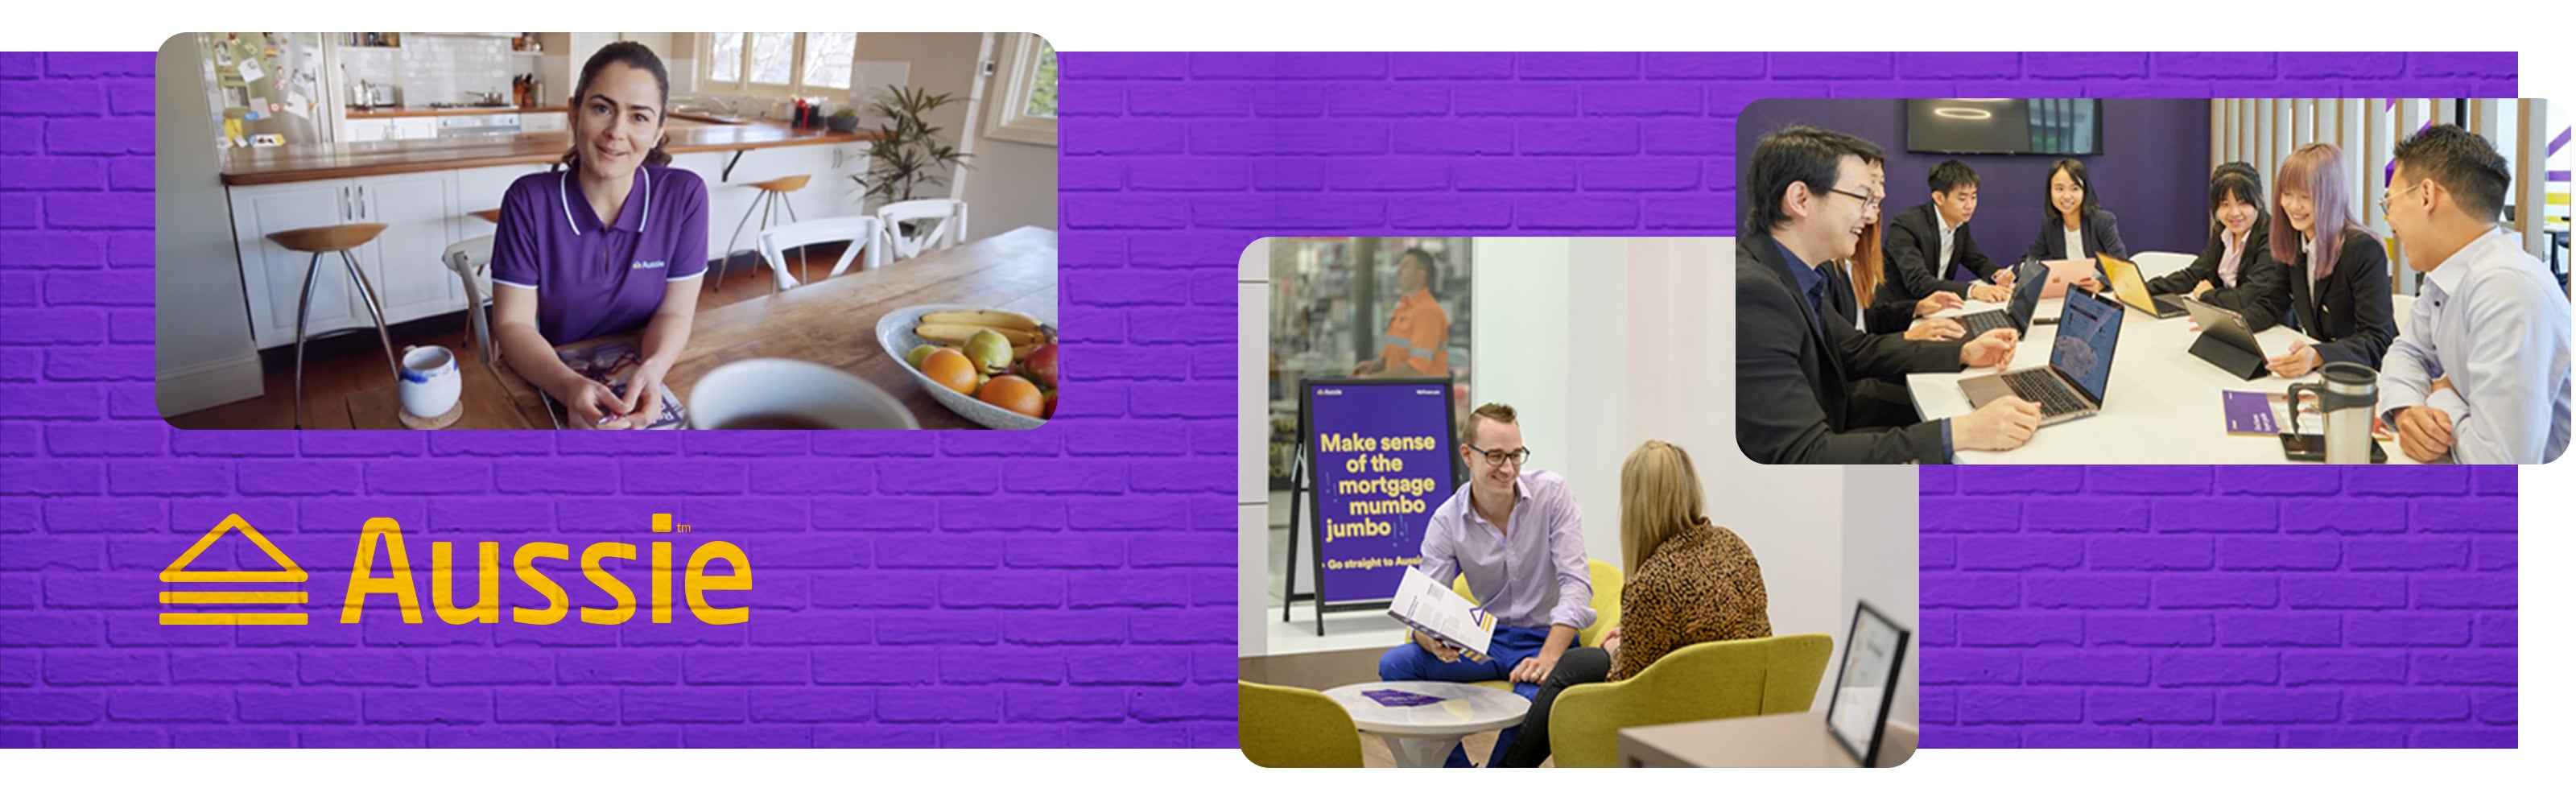 Collage of photos of Aussie Home Loans employees overlaid on top of a purple background with the Aussie logo on the left